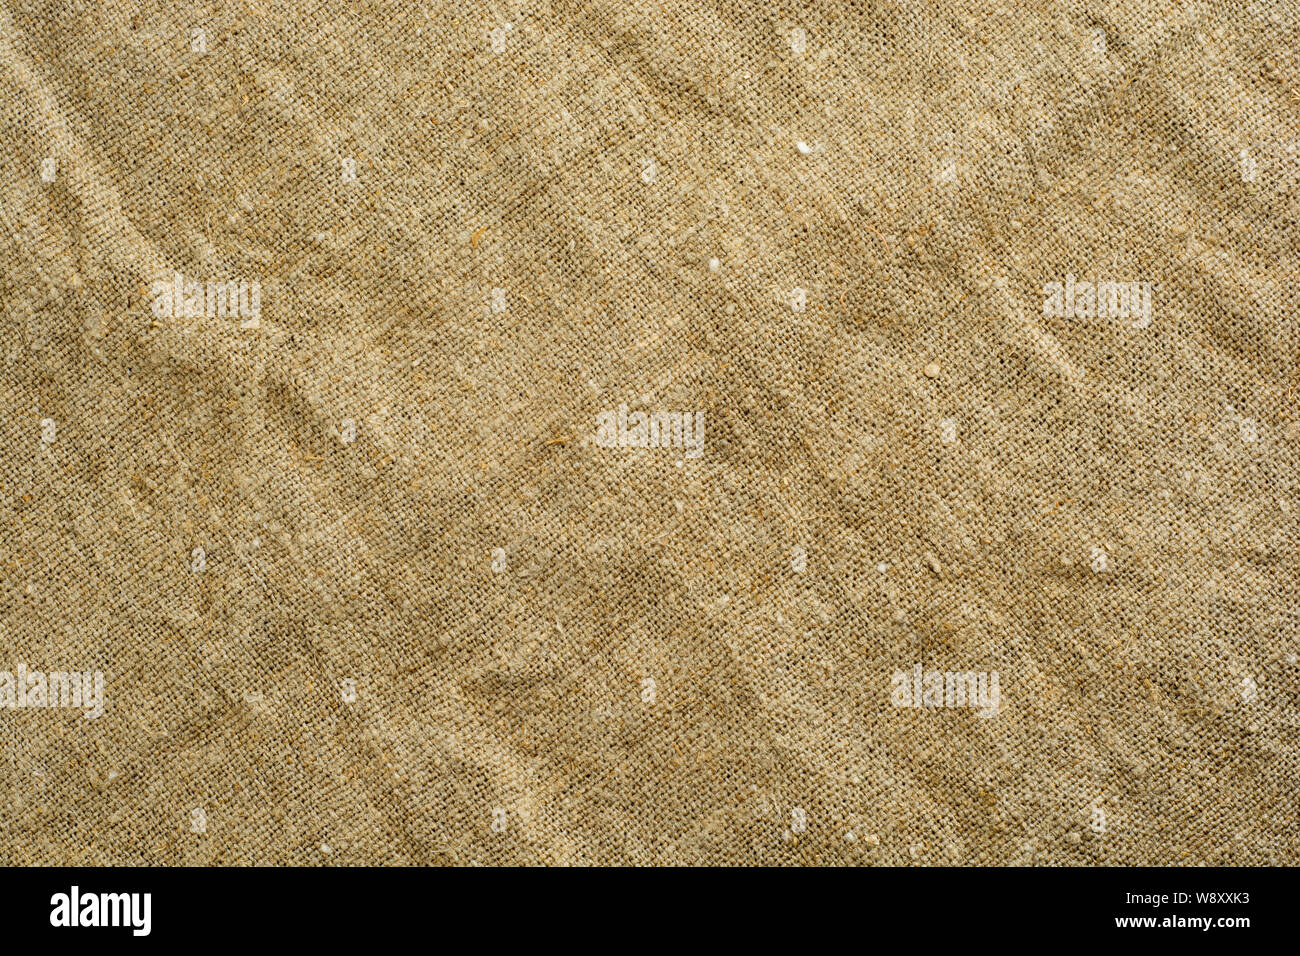 Linen canvas texture background close up. Flat lay. Stock Photo